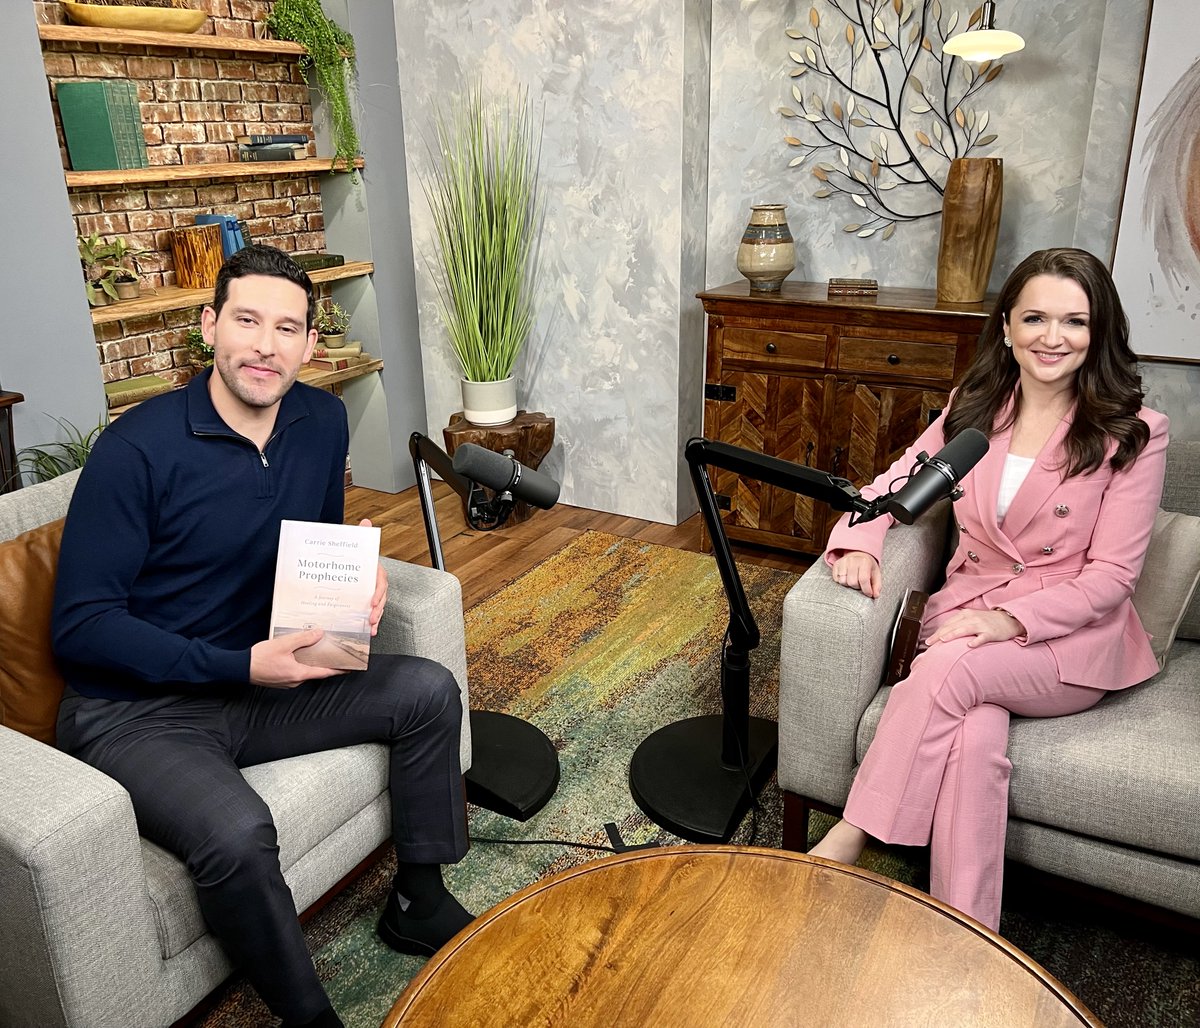 Generational curses, including abuse, poverty and mental illness, can be broken through study, prayer and faith community. Thank you Casa Zoen @CBNOnline for sharing my book Motorhome Prophecies on how God helped me do just that. Watch our interview: youtube.com/watch?v=7k5N4n…